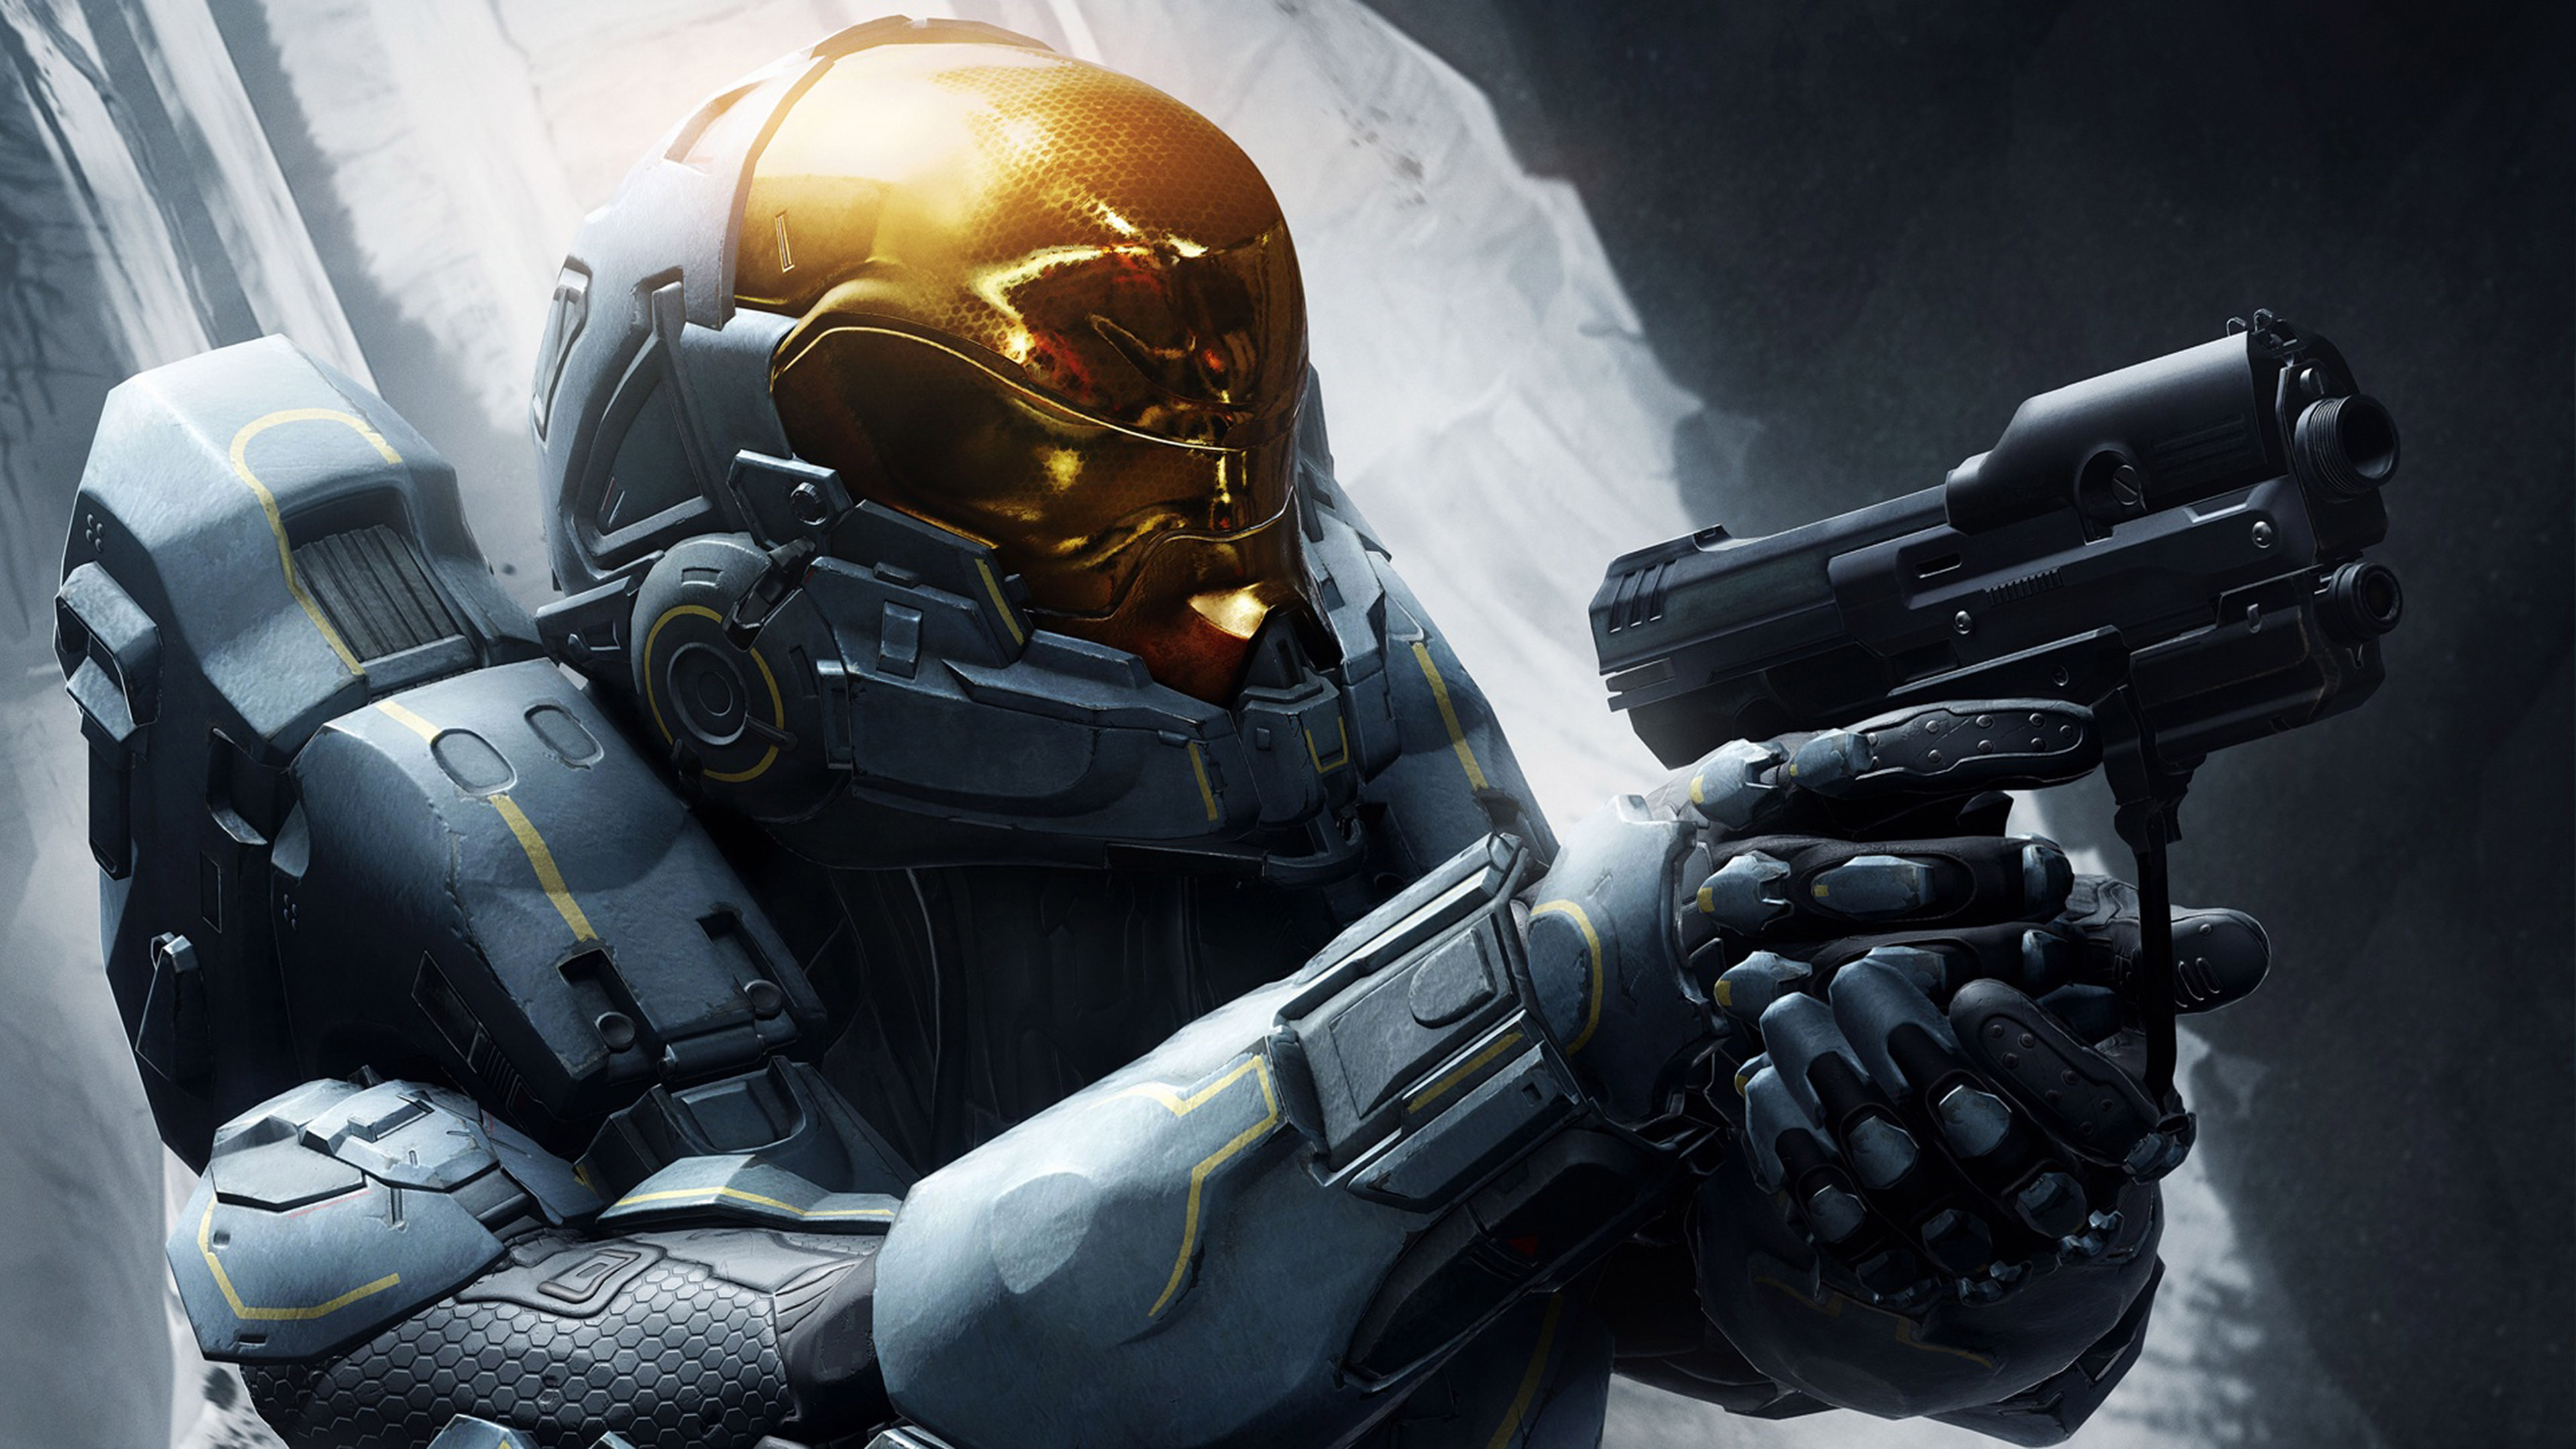 HD Background Halo 5 Guardians Game Kelly Shooter Robot Wallpaper 3840x2160